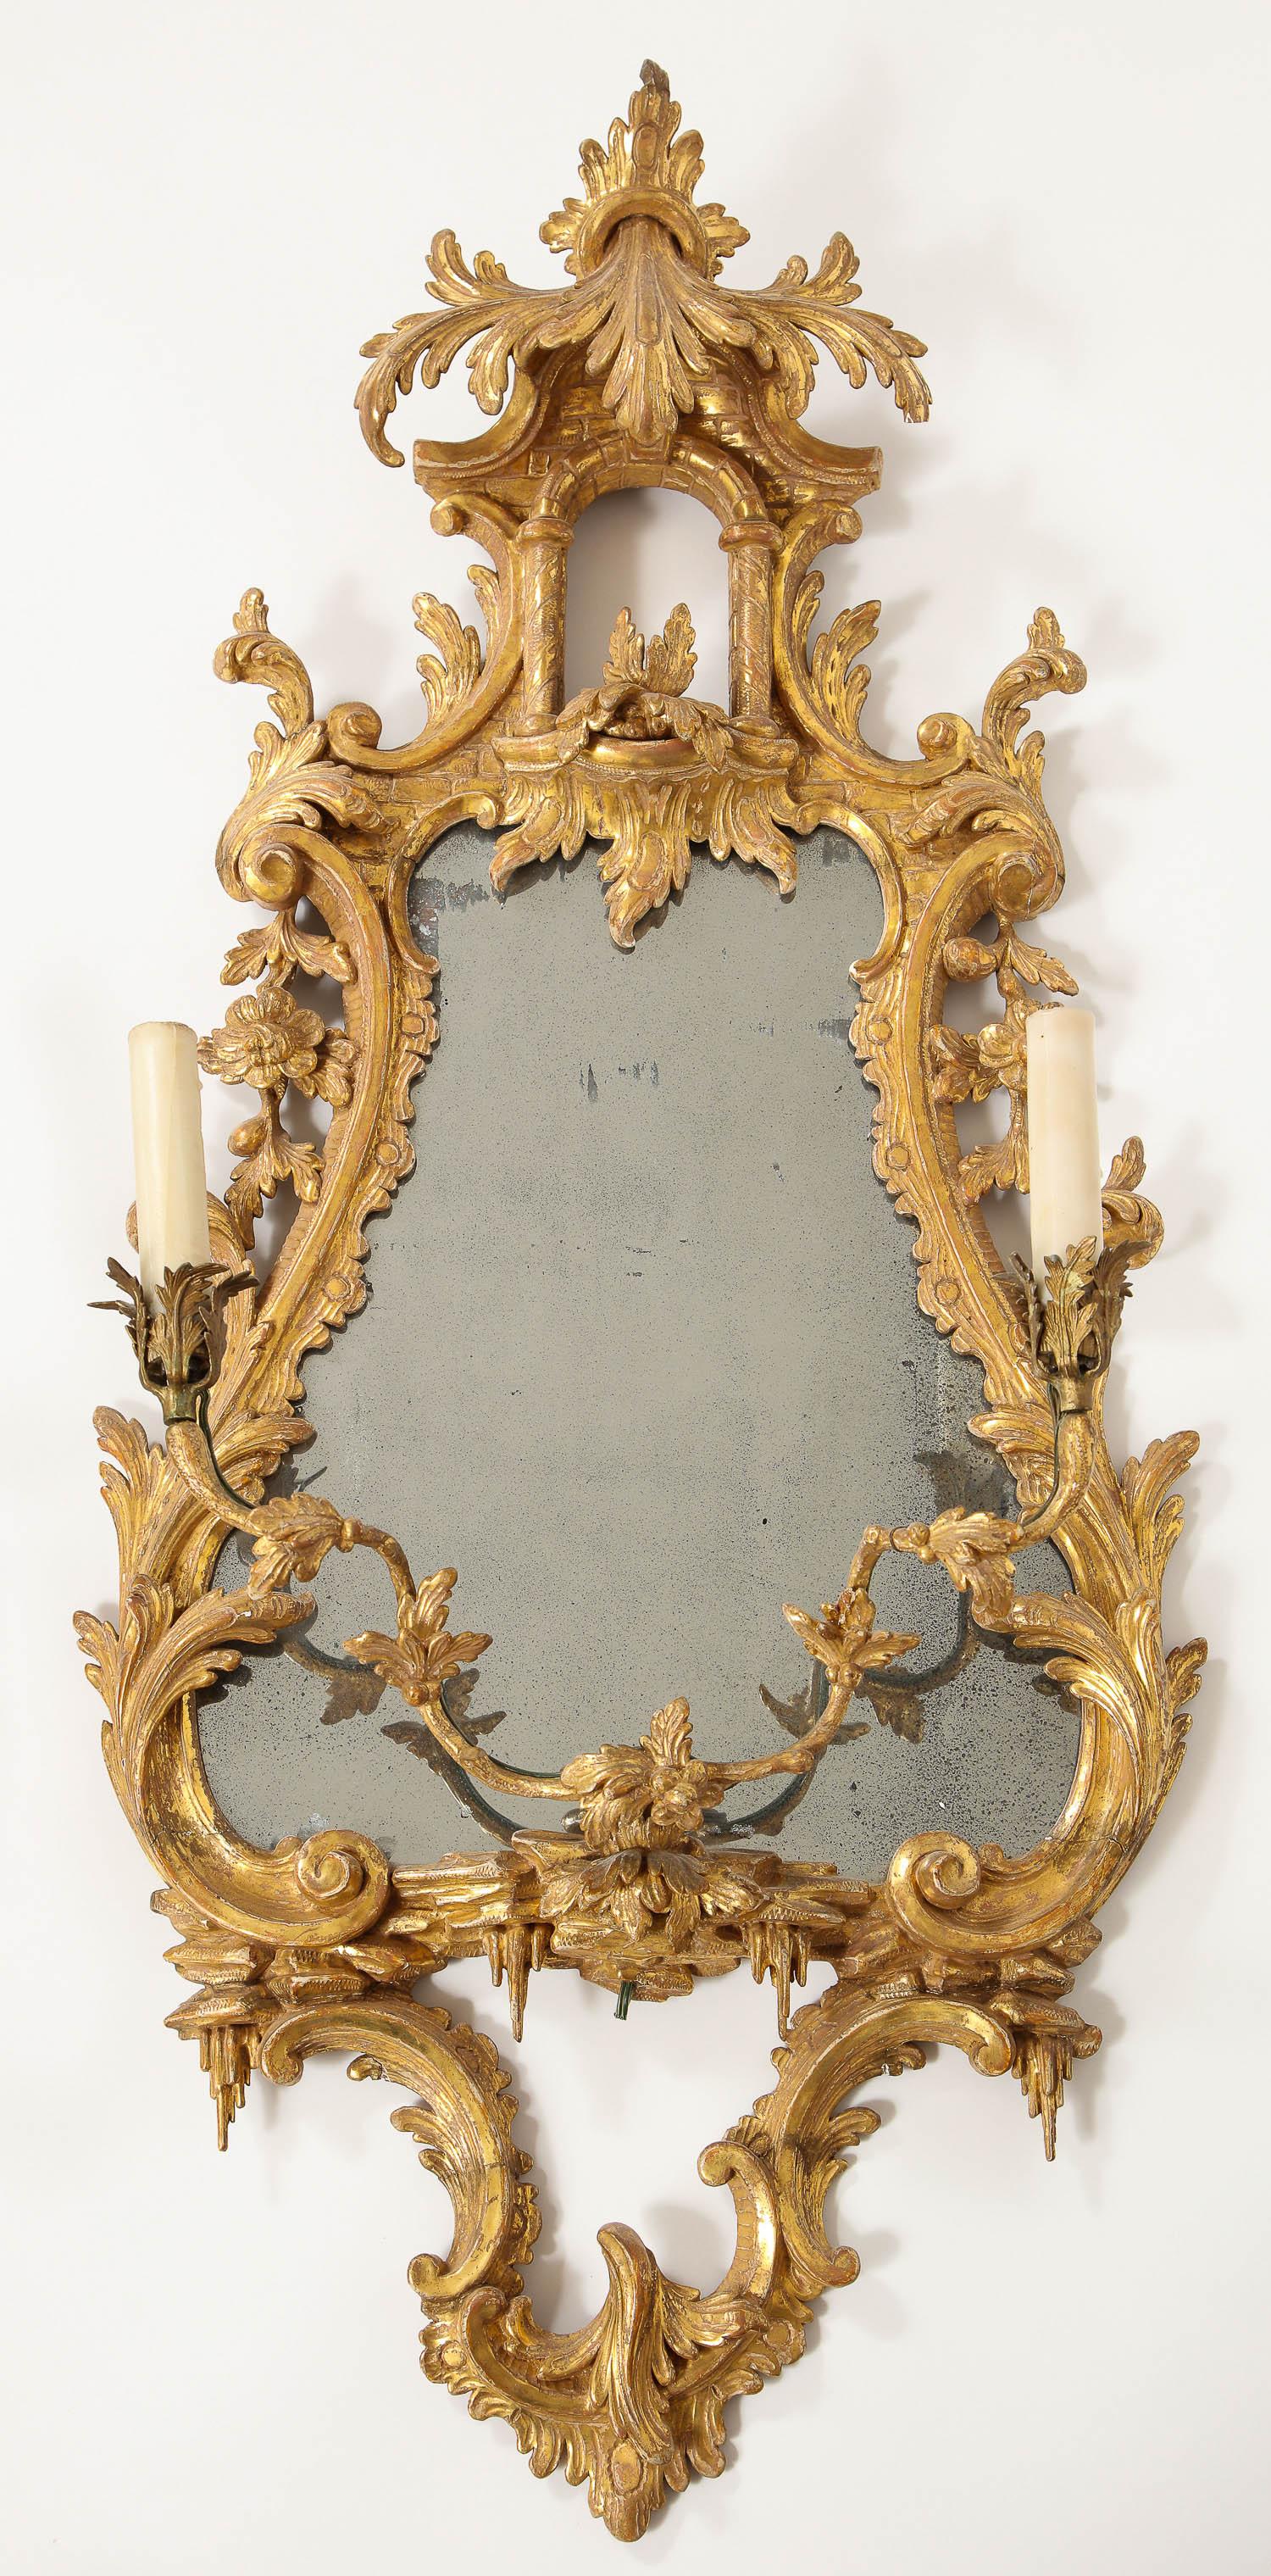 Pair of 18th Century English Giltwood Chinoiserie Mirrors with Candleholders For Sale 6